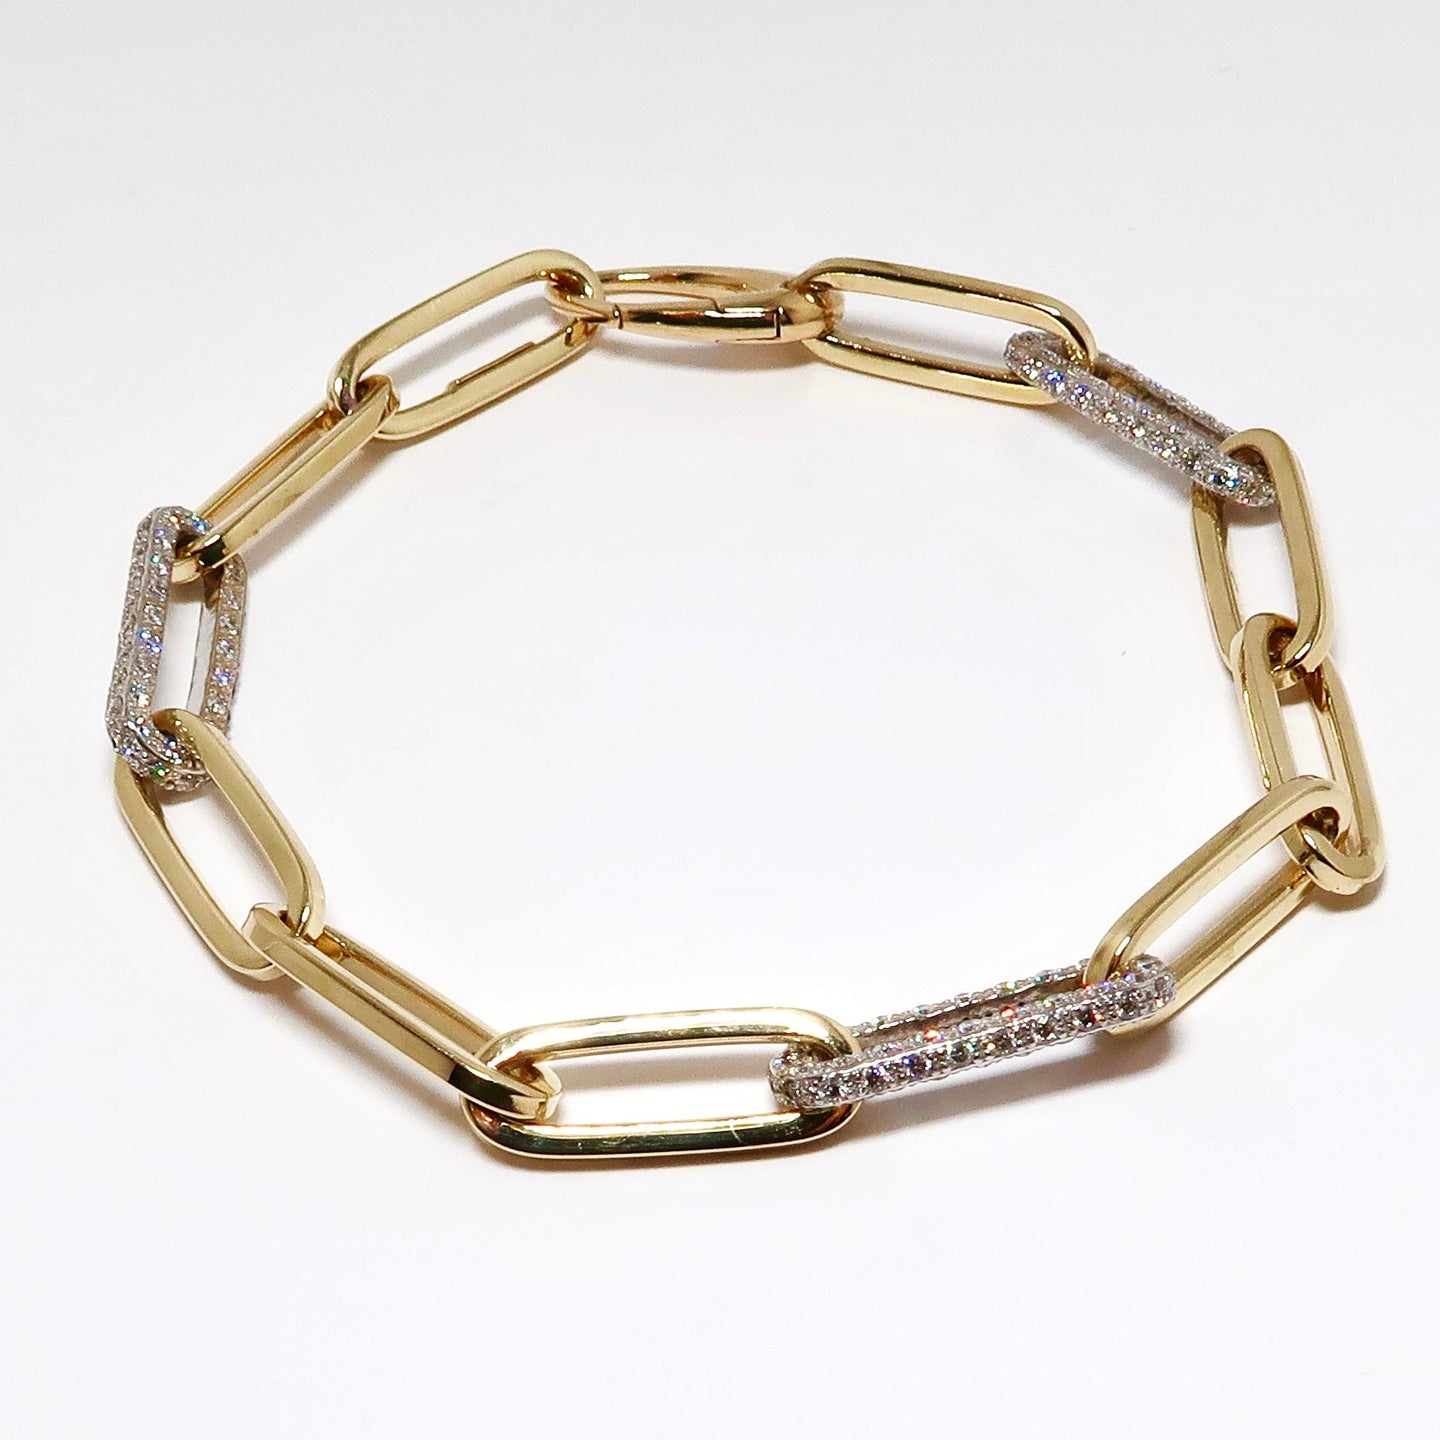 14k White & Yellow Gold Paperclip Bracelet with Diamonds